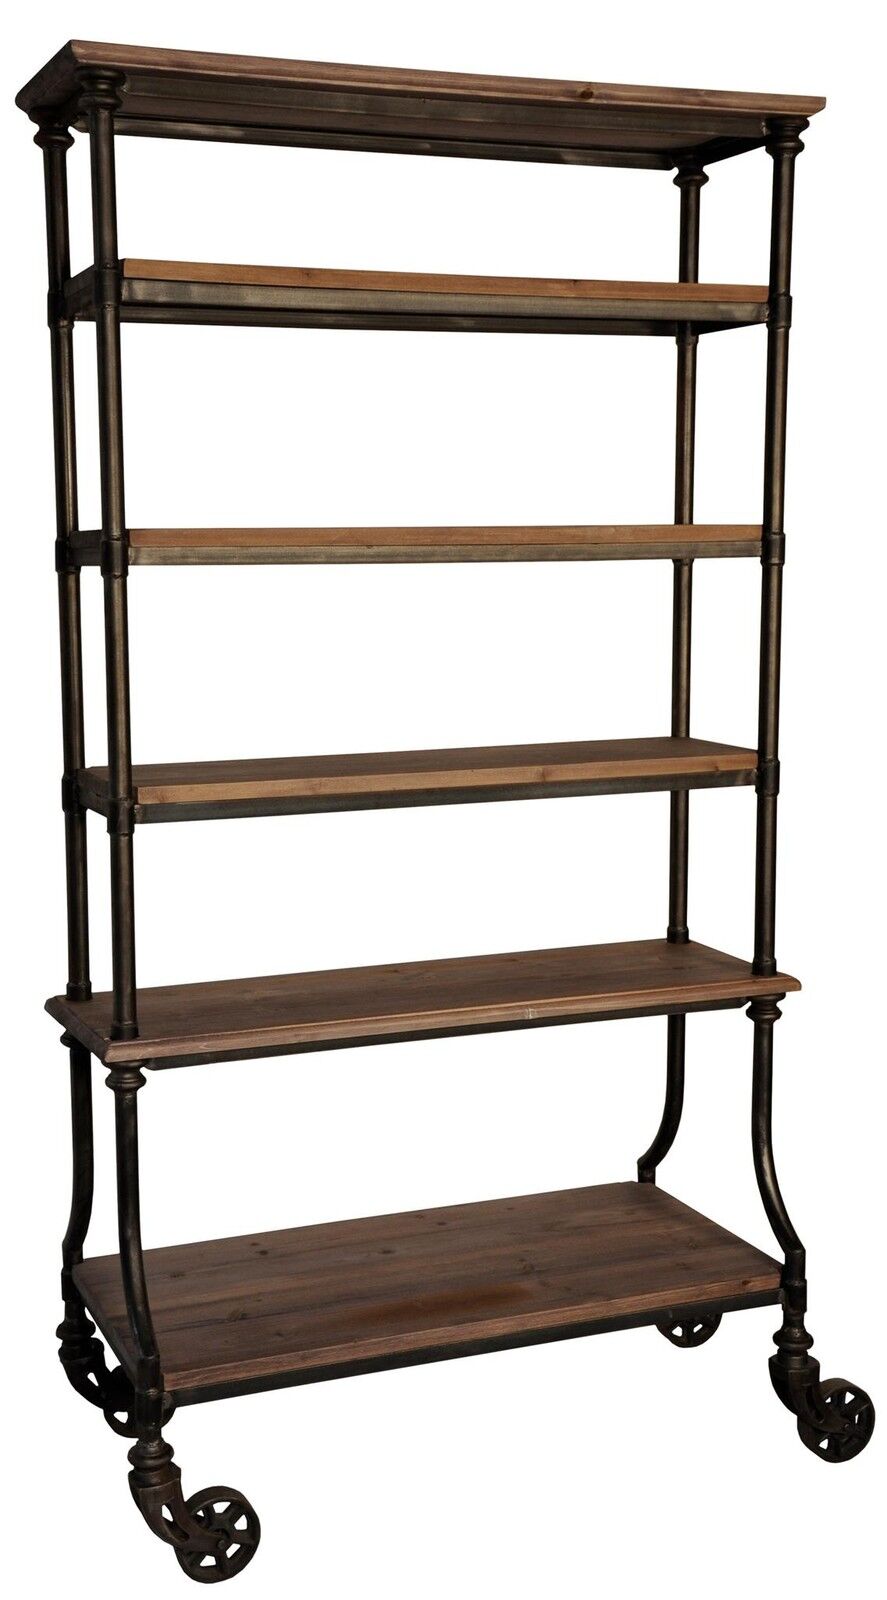 82\u0026quot; tall Bookcase nat wood 6 shelves rusty metal on coasters industrial vintage  eBay